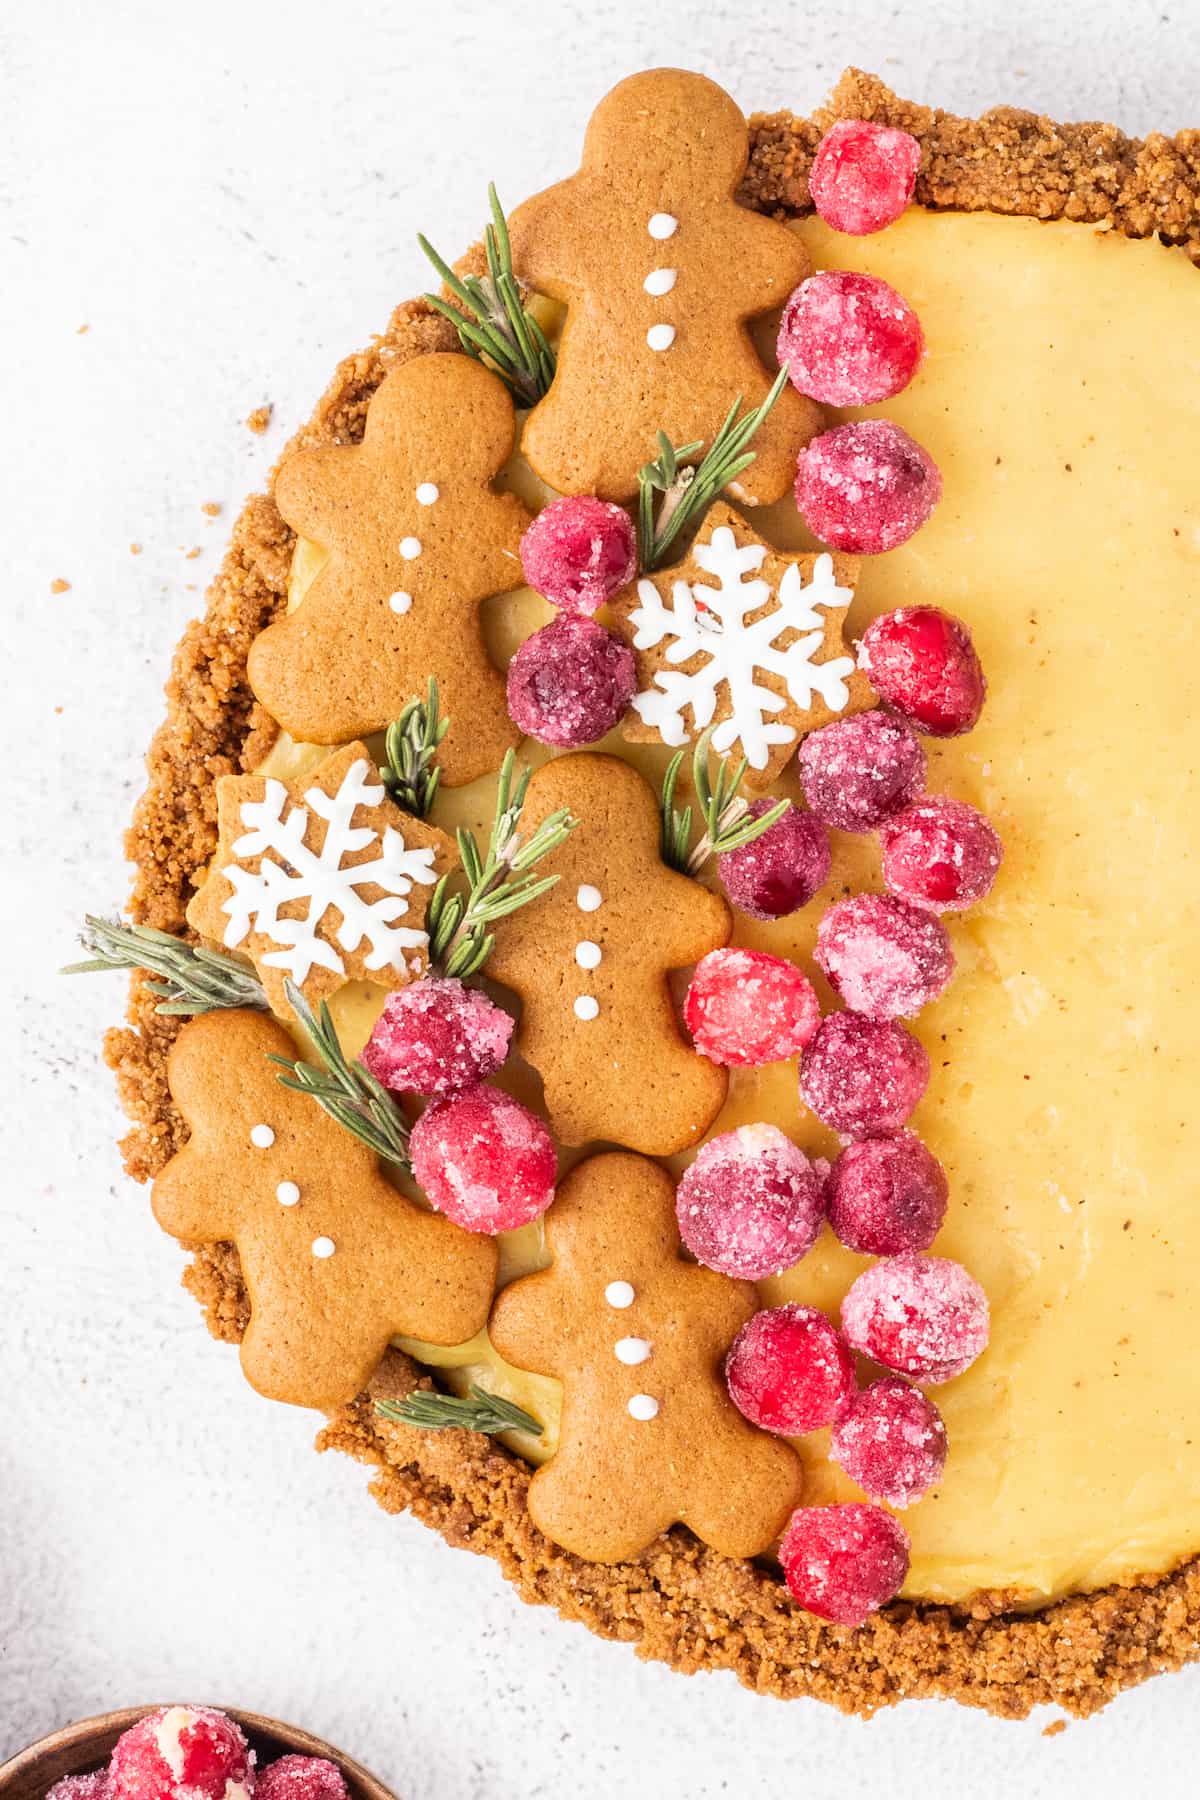 Gingerbread pie with cranberries and gingerbread cookies.